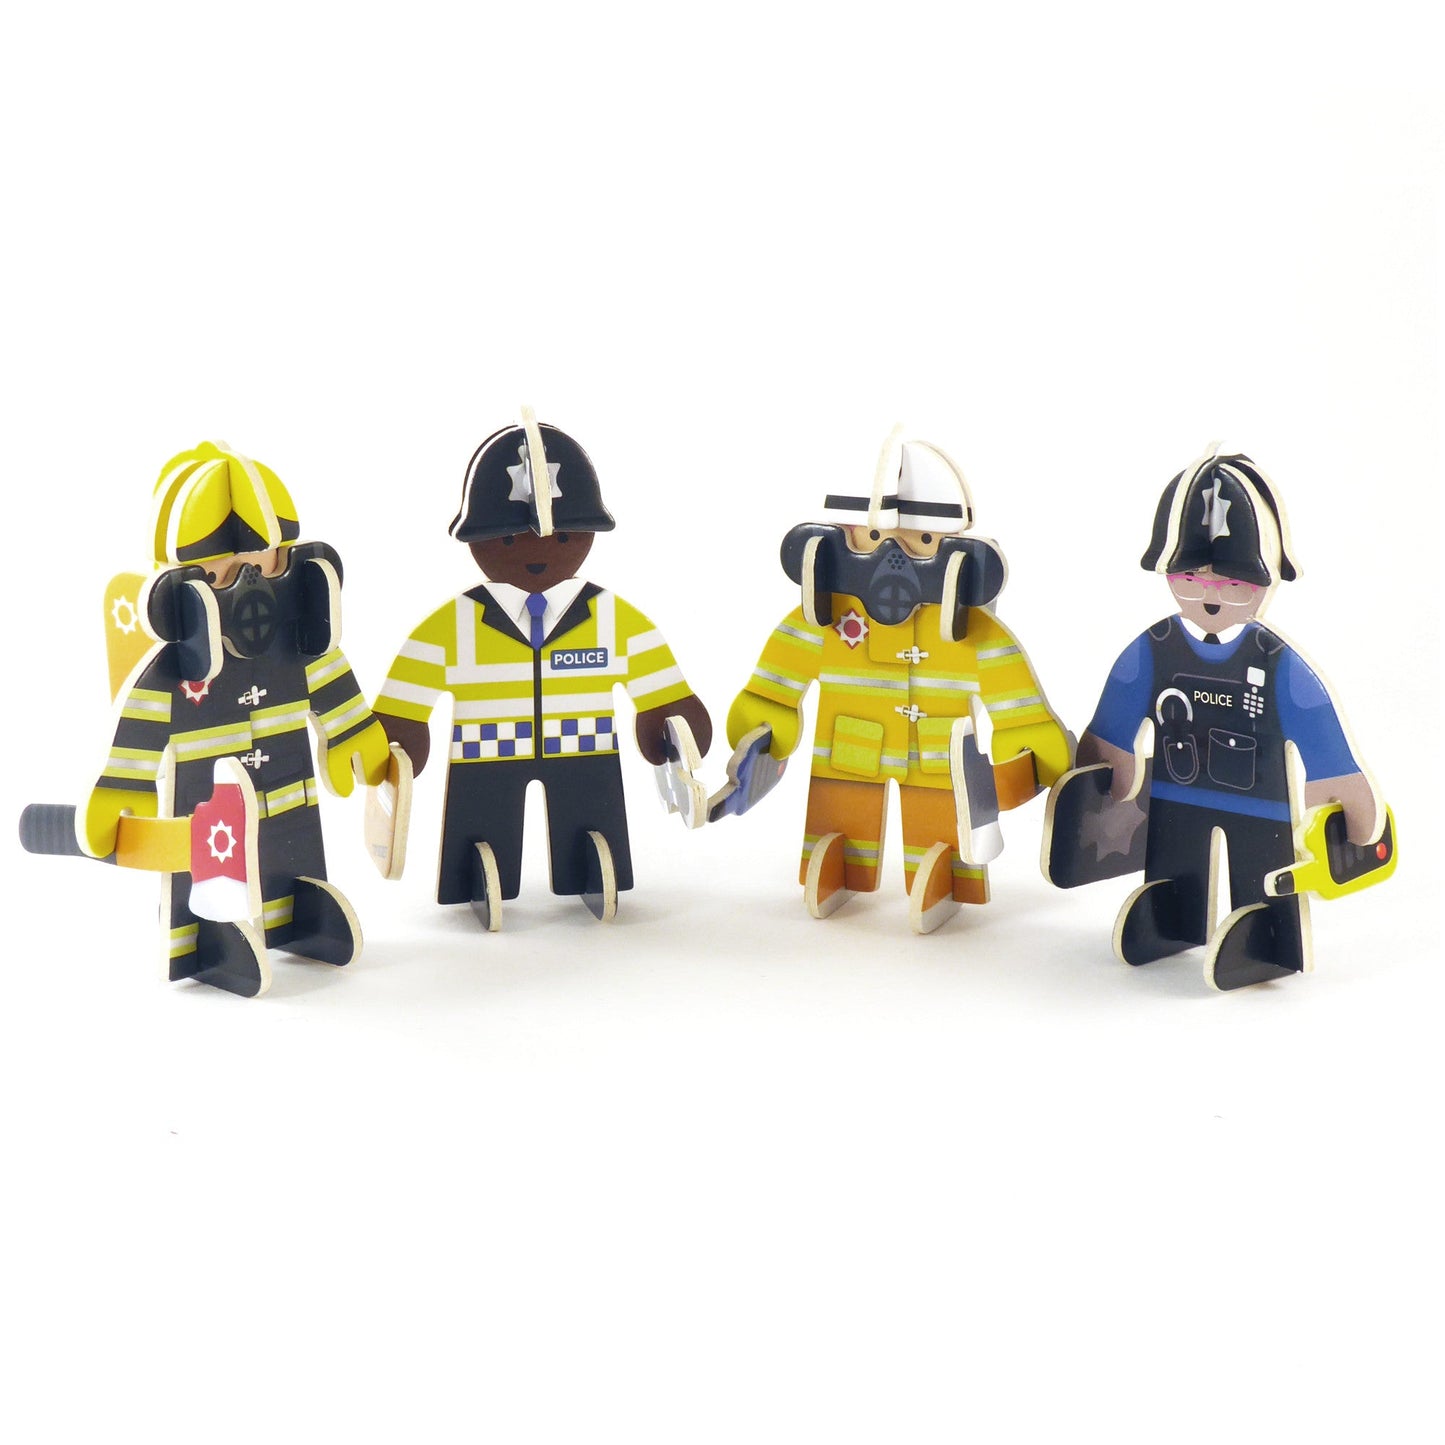 PlayPress Rescue Team - Eco-friendly and imaginative set for creative and sustainable play